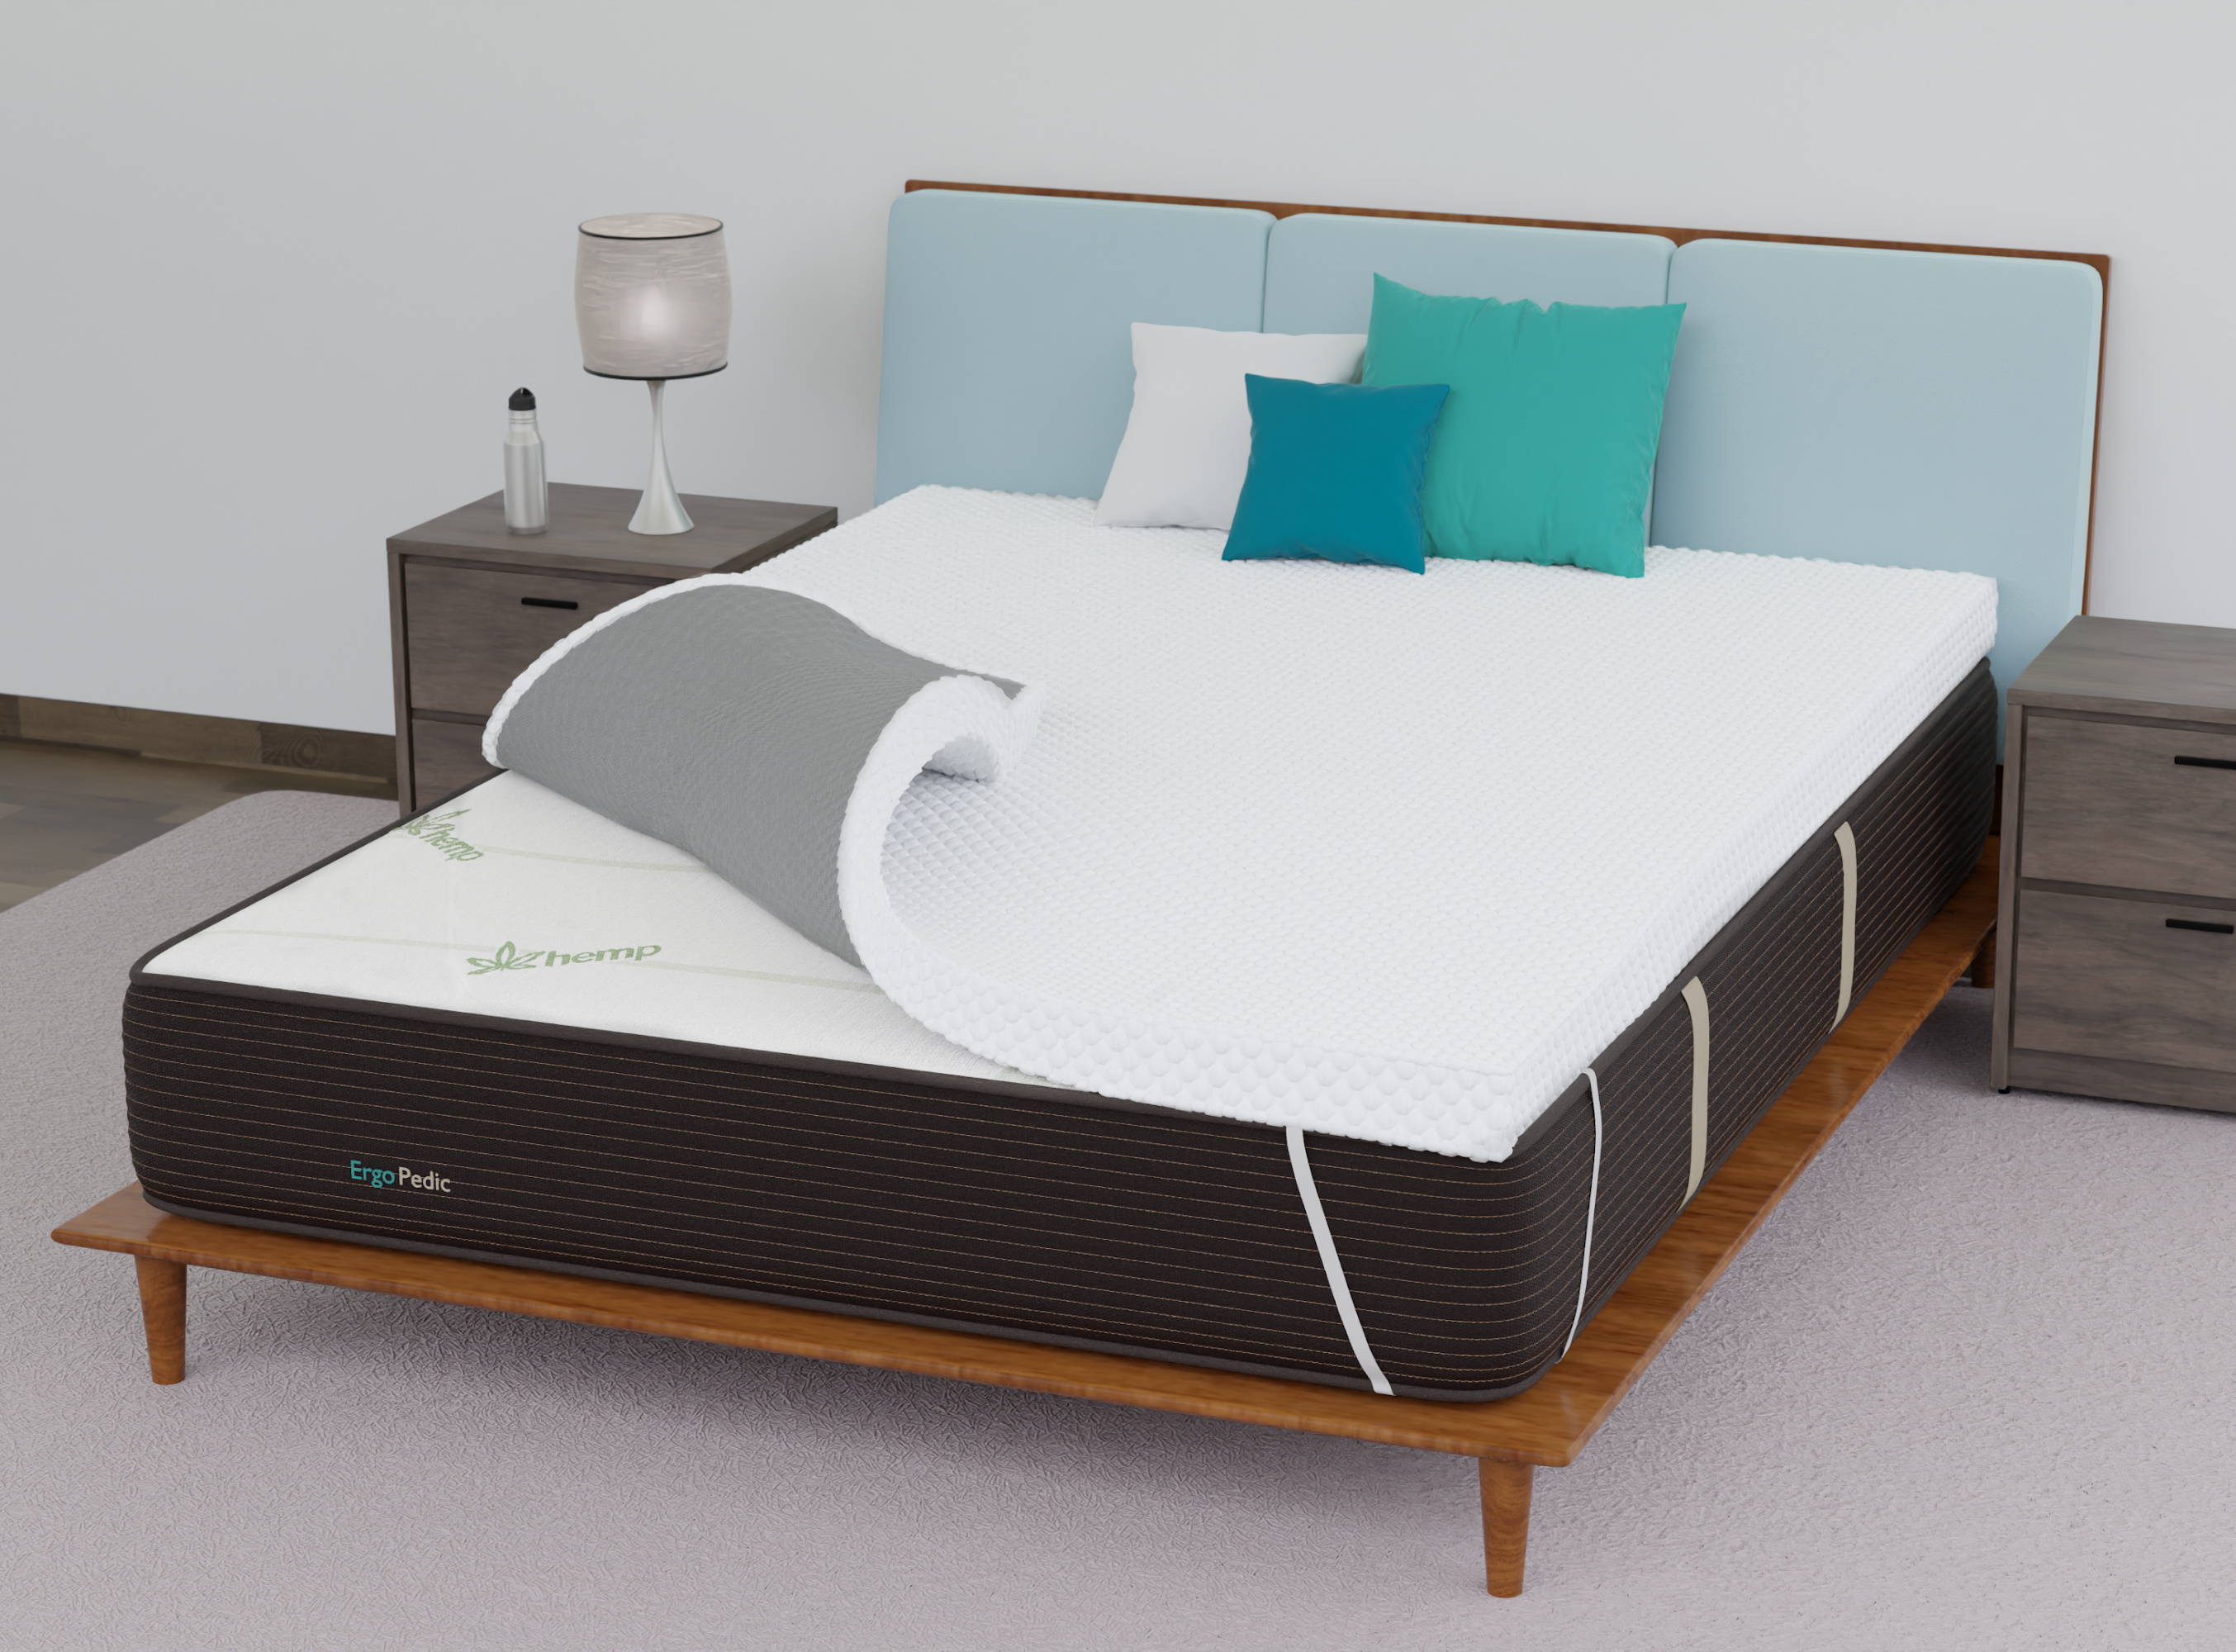 Soft comfortable mattress topper on a bed in a bedroom with the corner flipped up.